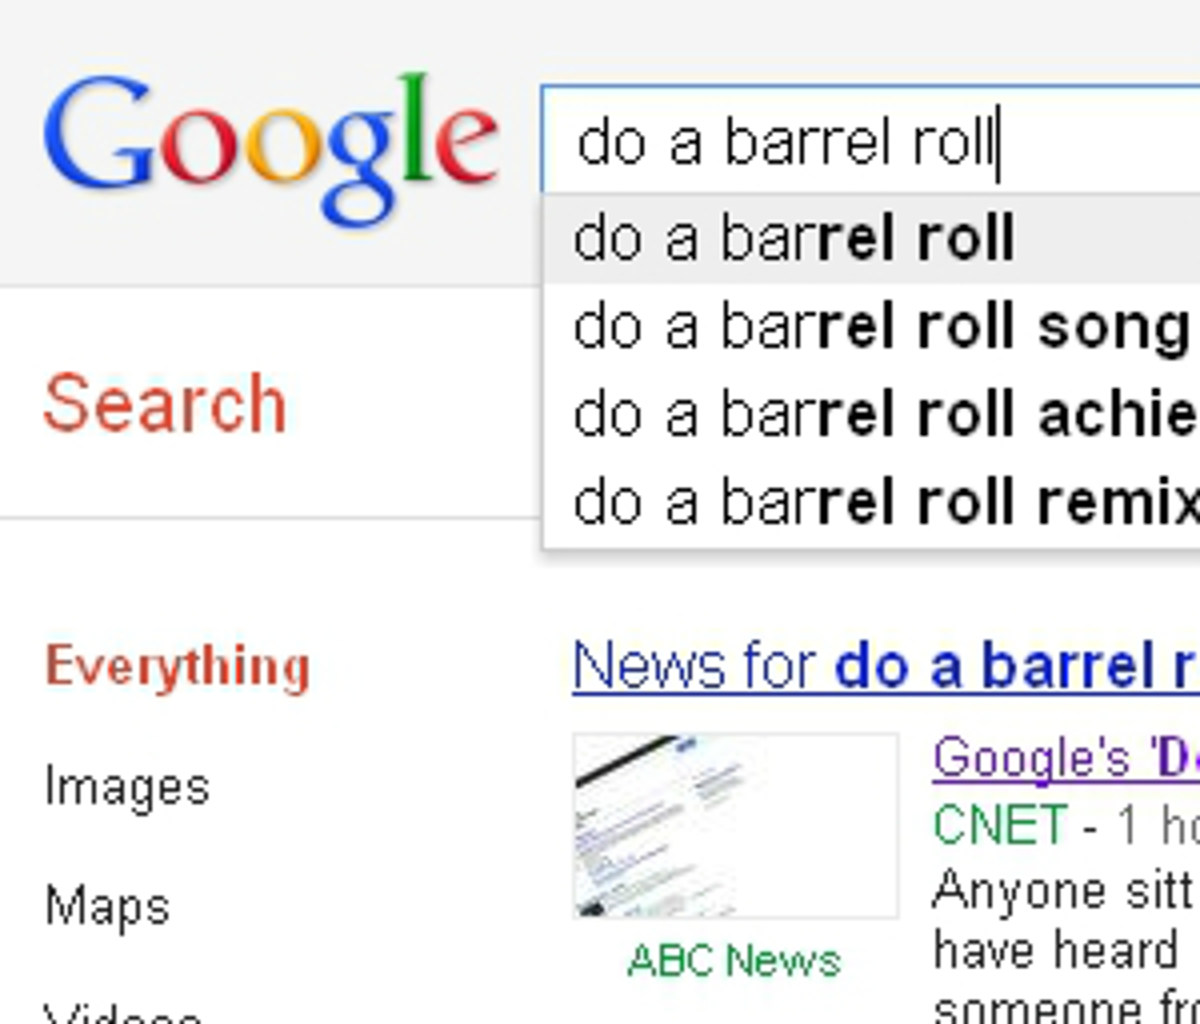 Google's 'do a barrel roll' gimmick puts Twitter in a spin